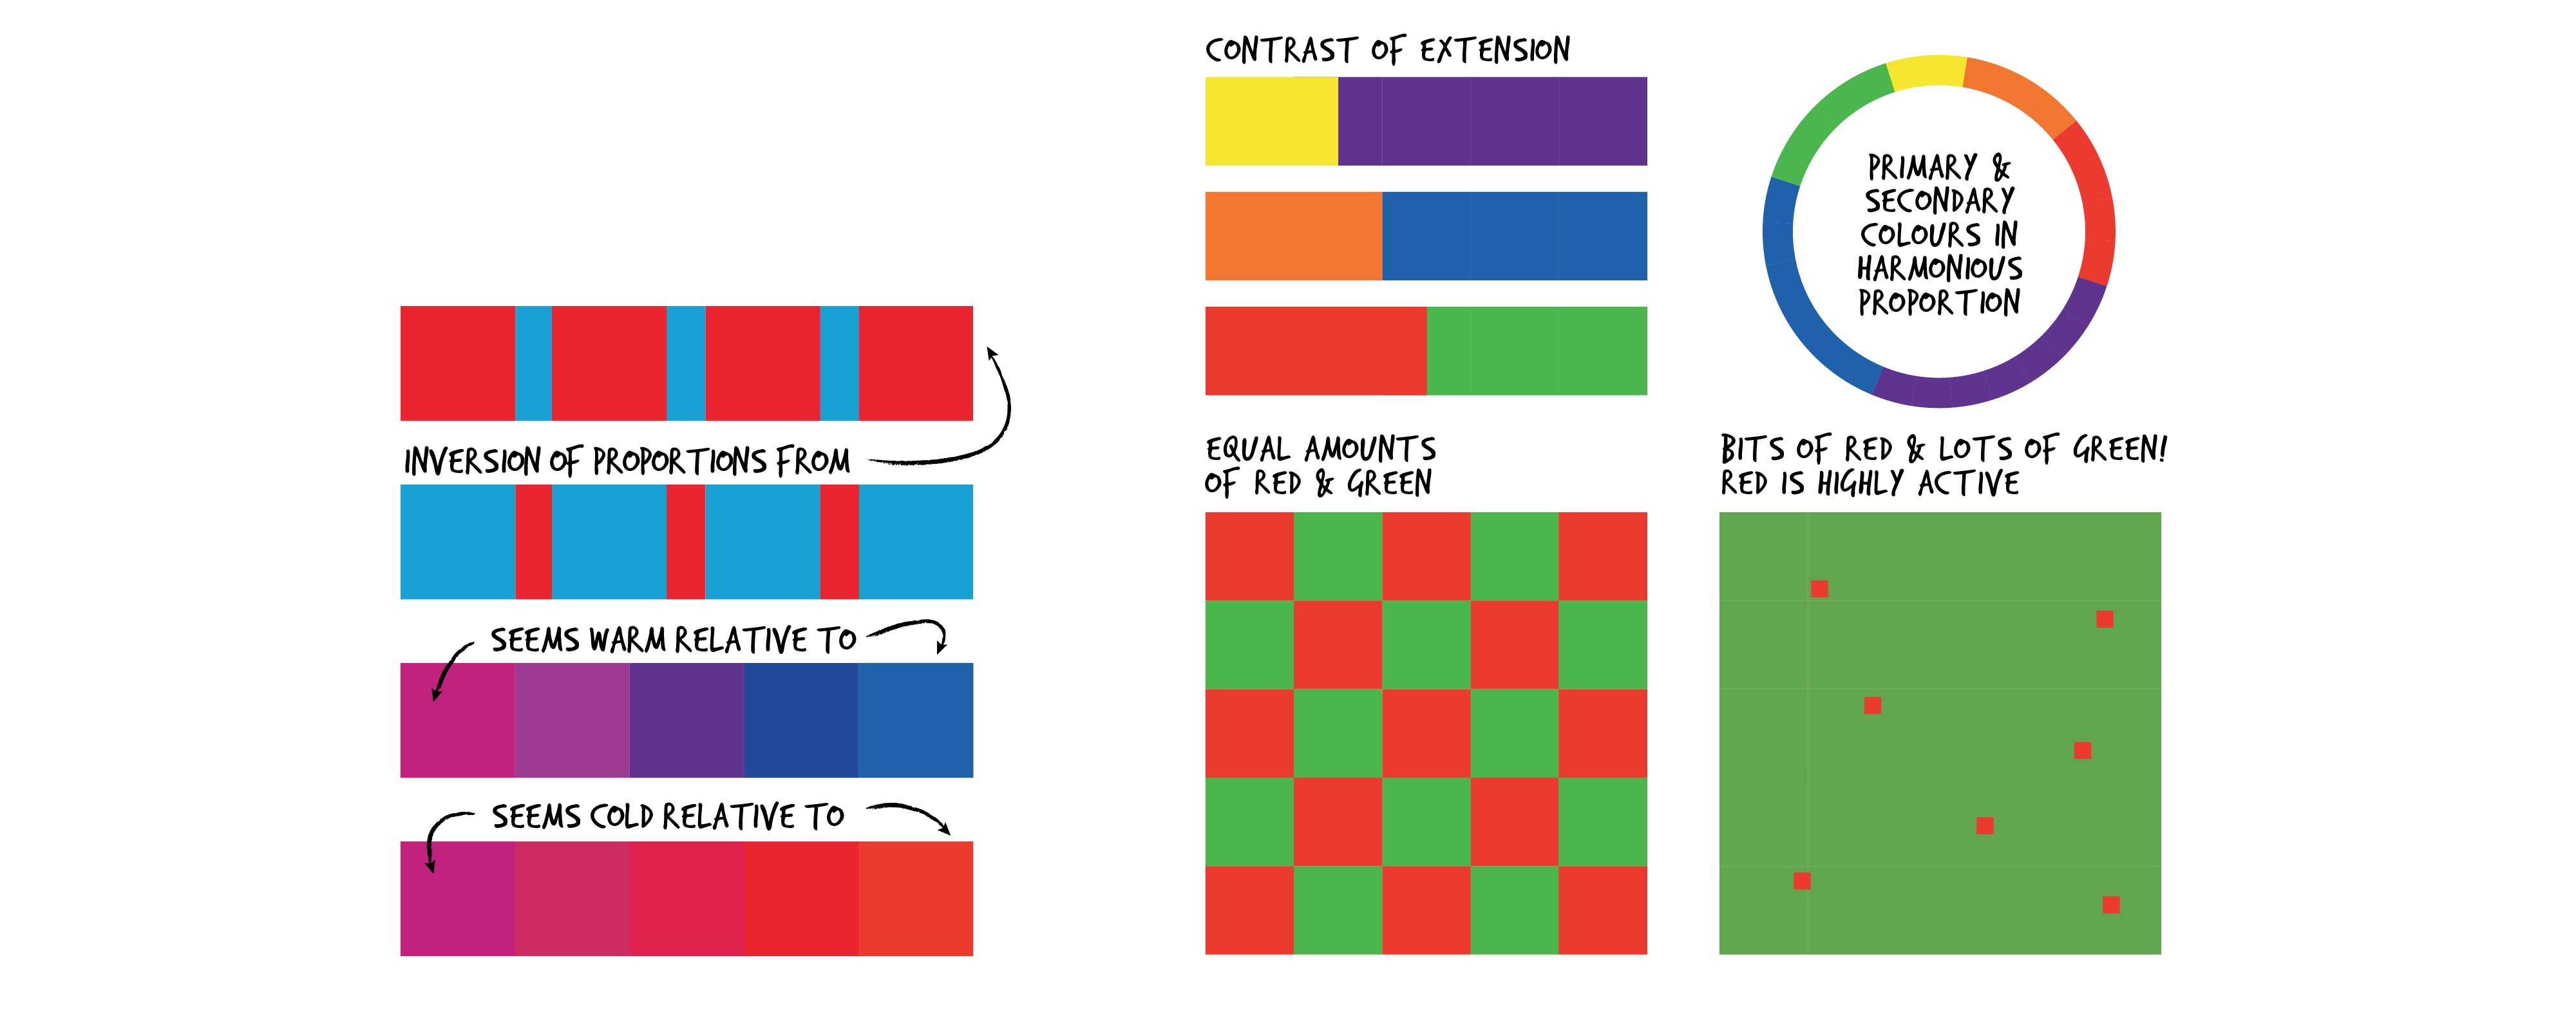 4 diagrams illustrate Contrast of Extension concept. The first has 4 horizontal colour bars stacked atop one another. The top bar is titled Highest Warm/Cold Contrast and has large red sections contrasting small blue sections. The second bar is titled Inversion of Proportions and has large blue sections contrasting small red sections, which is harder to look at than the previous bar due to the colour ratio. The bottom bars show two colour palettes, both starting with violet. The first goes from violet to blue, showing that violet is warmer than blue. The second goes from violet to red, showing that violet is cooler than red. The second disagram is titled Contrast of Extension and has 3 rectangles stacked on top of one another. Top rectangle is 1/3 yellow and 2/3 purple. Middle rectangle is slightly less than 1/2 orange and slightly more than 1/2 blue. Bottom rectangle is 1/2 red and 1/2 green. The third diagram is titled Primary &amp; Secondary Colours in Harmonious Proportion and shows a colour wheel with colours yellow, orange, red, purple, blue and green. All colours take up varying amounts of space in the wheel, with yellow taking up the least space, followed by orange, red and green (about the same), blue and purple (about the same). The fourth diagram has two 5x5 red and green grids. The first grid is titled Equal Amounts of Red and Green and has the two colours in a checkered board. The second grid is a green square with 7 small red squares scattered inside. This grid is titled Bit of red, lots of green! Red is highly active.